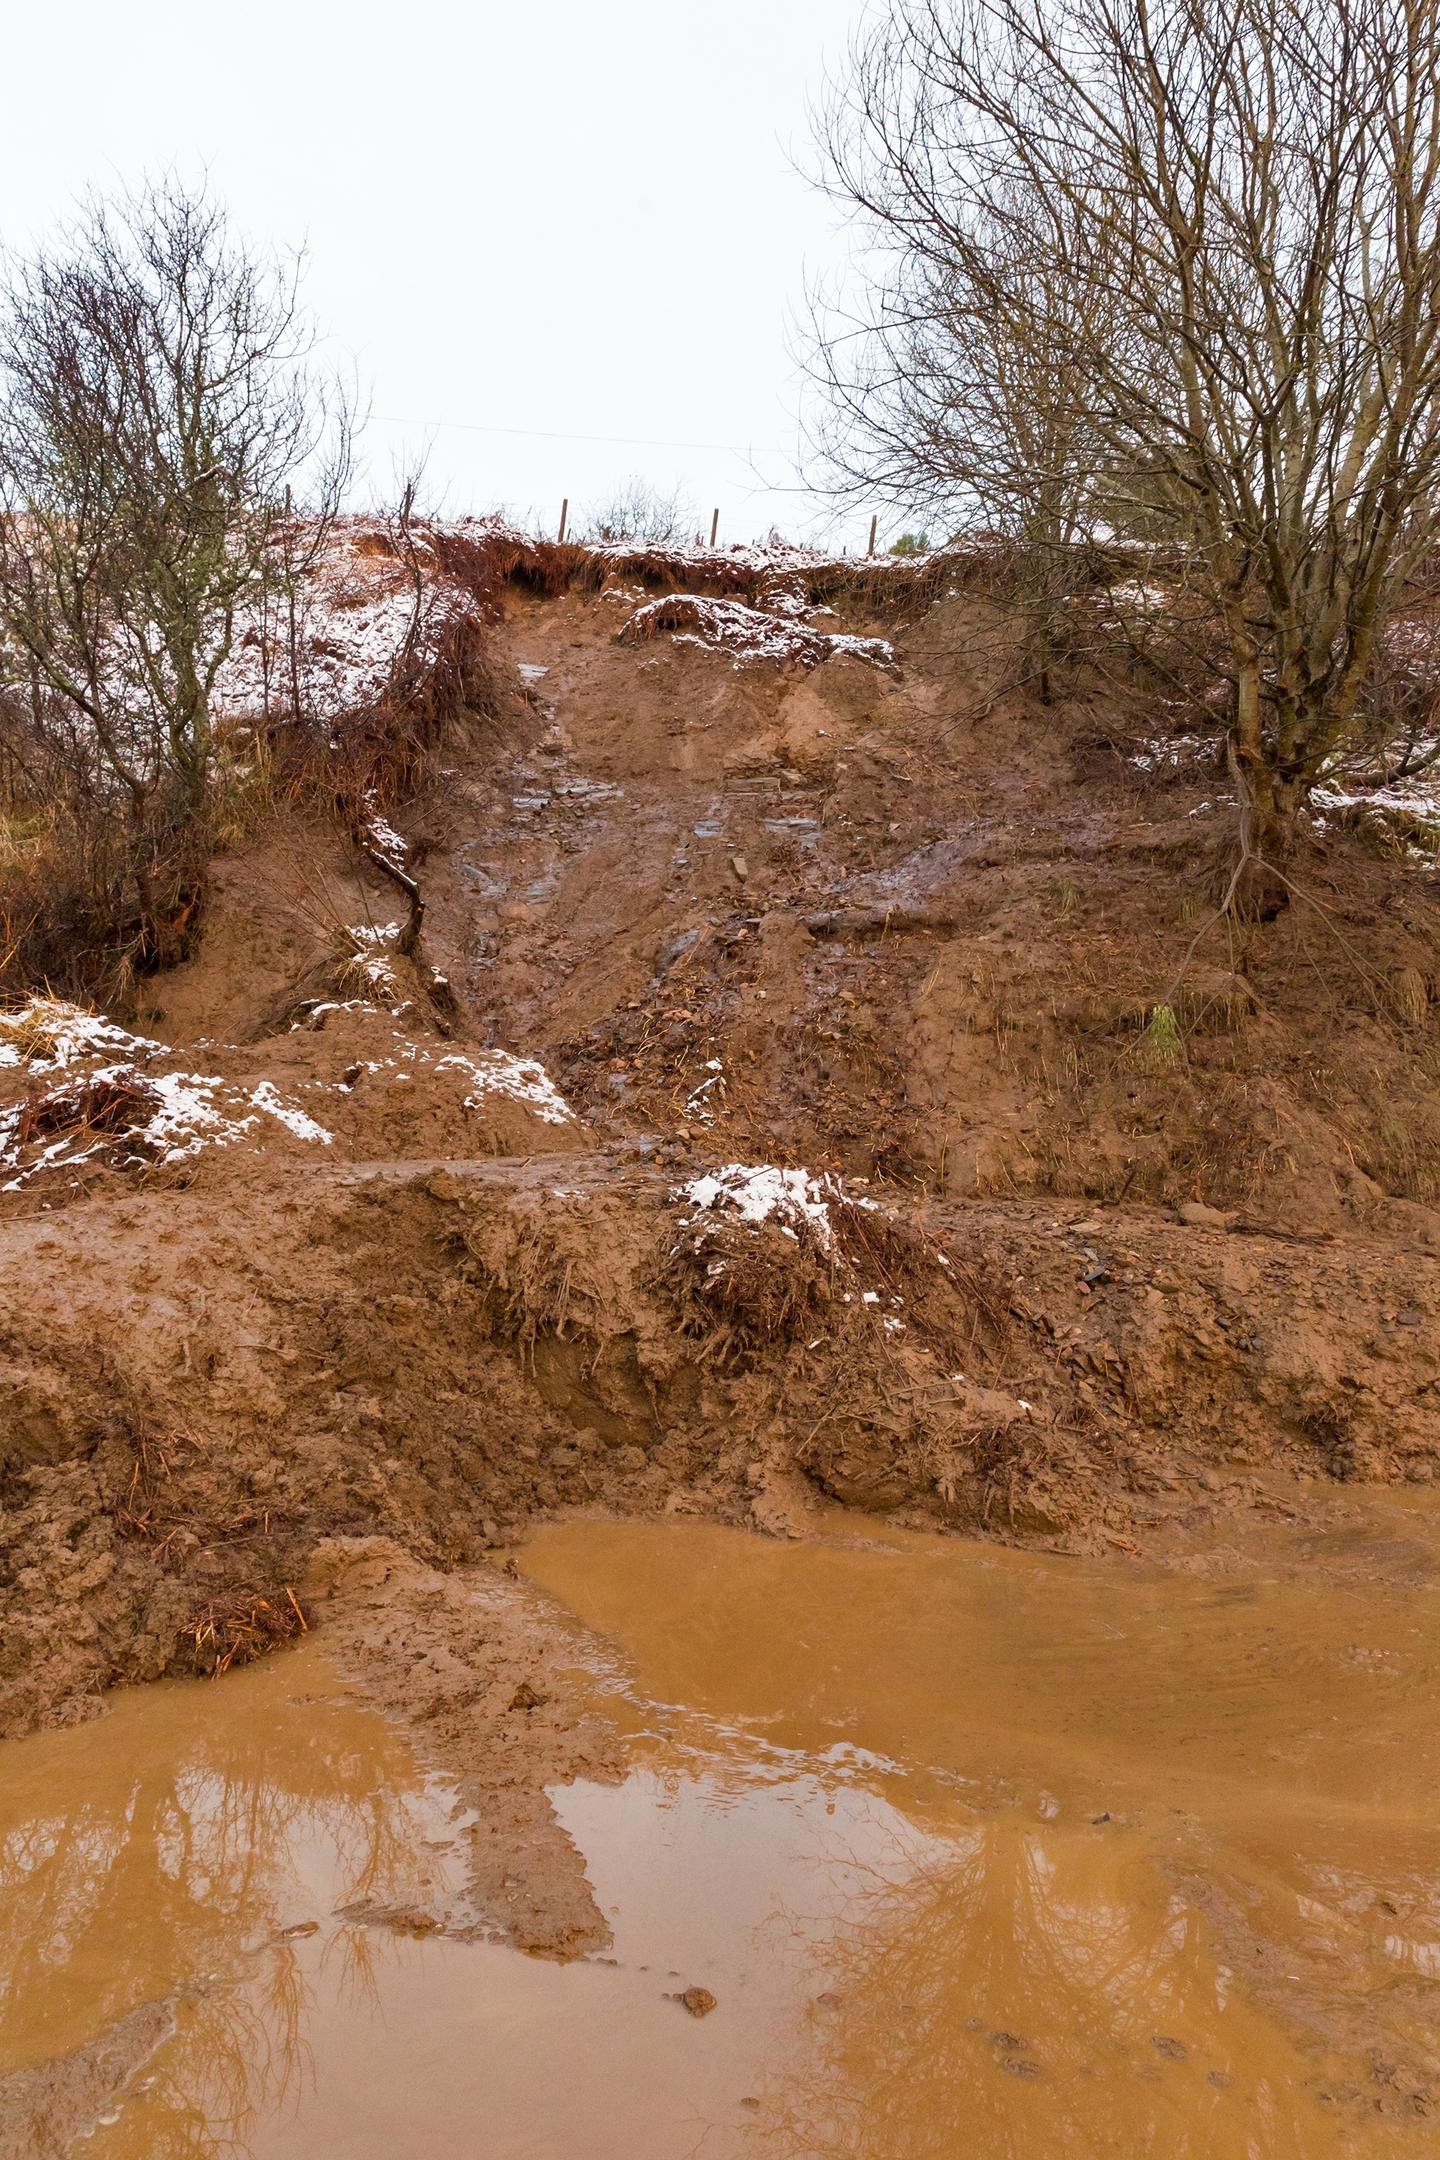 Hundreds of tonnes of mud block the road